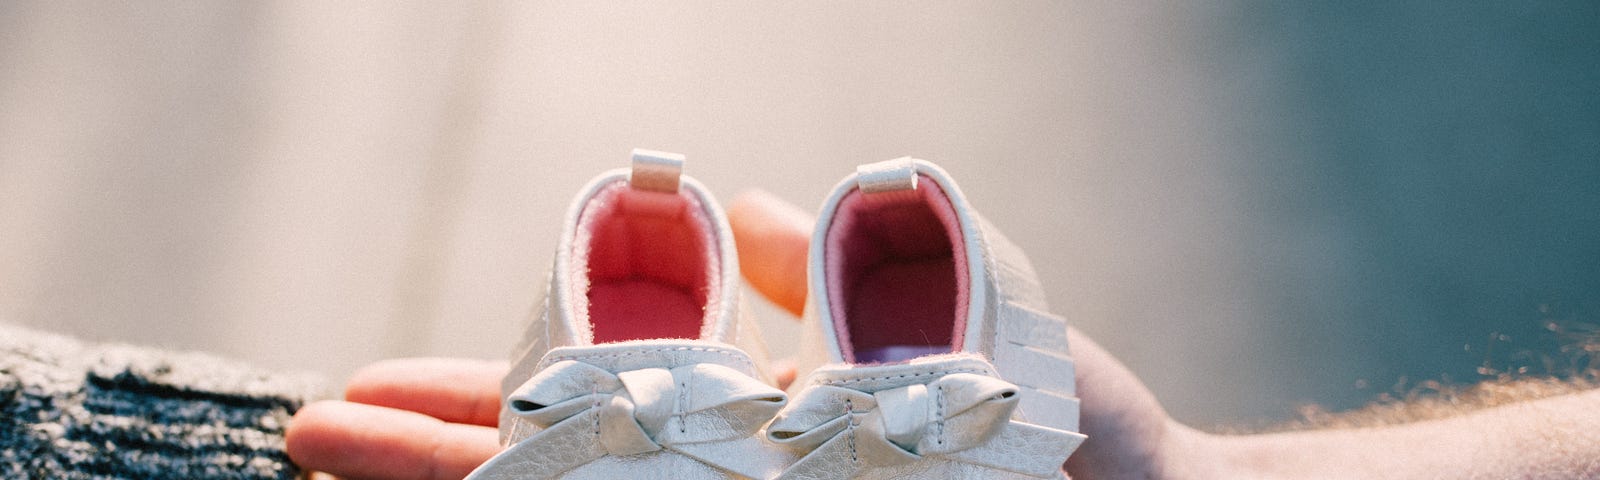 Baby shoes held in a couple’s hands. Focus on shoes.